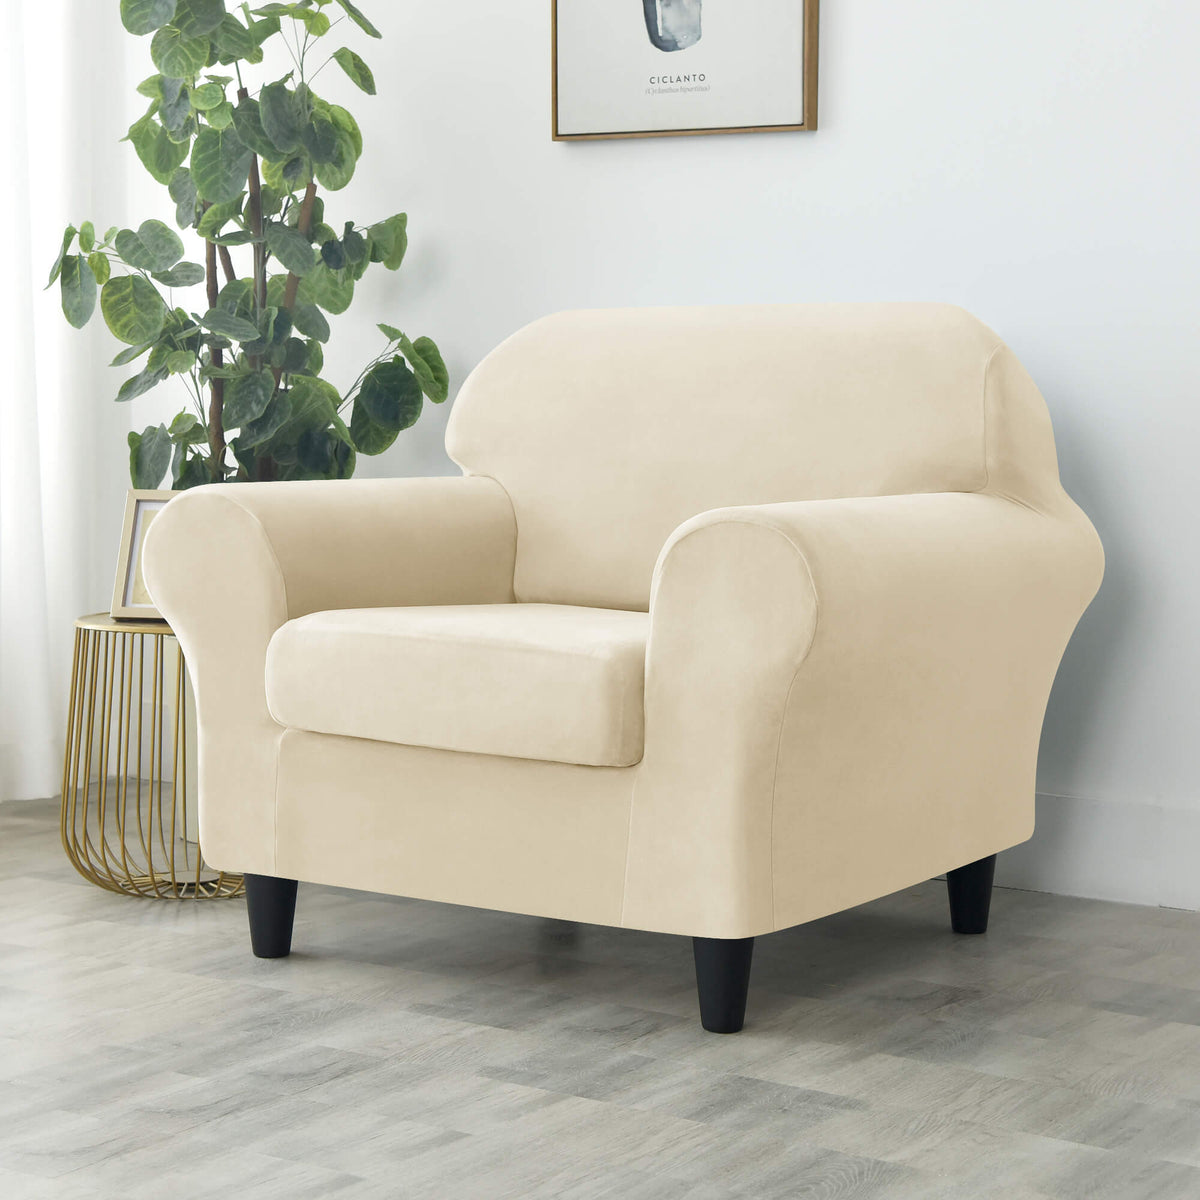 Crfatop Modern Couch Cover Stretch Armchair Sofa Seat Slipcovers with Elastic Bottom ArmchairBeige